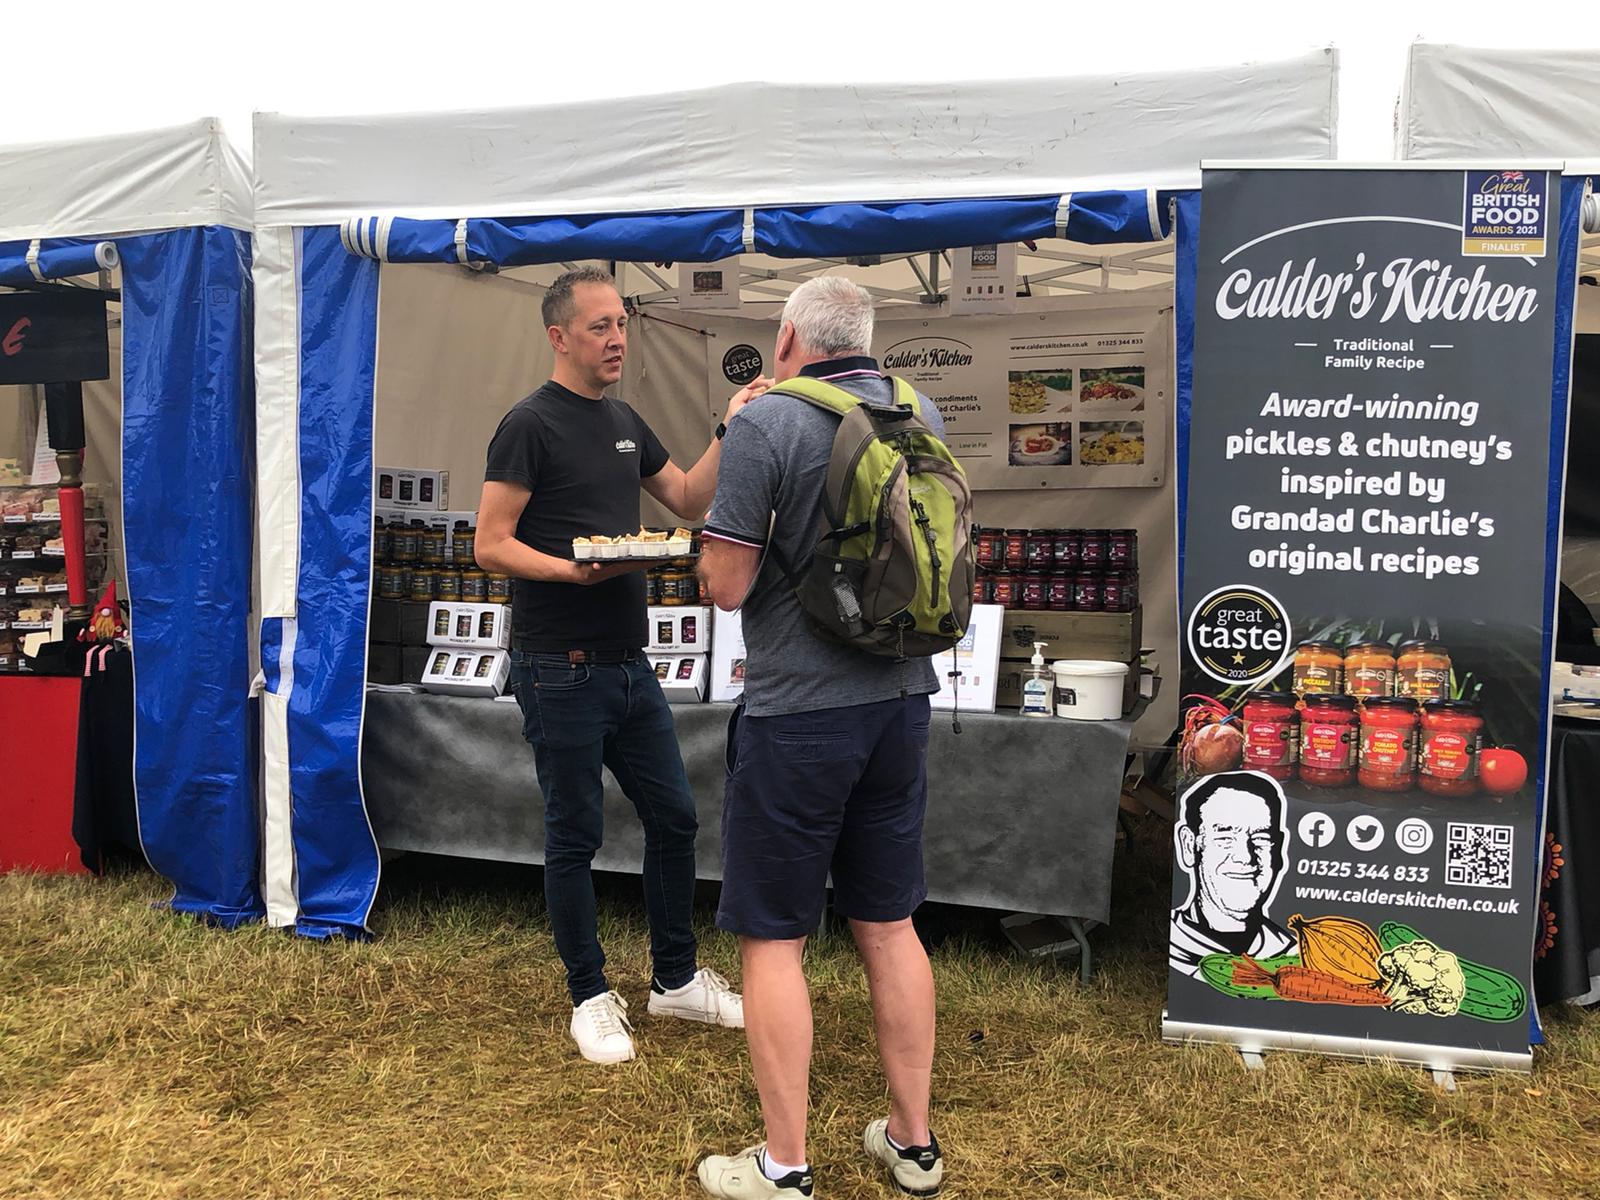 Festival of Food & Drink at Clumber Park